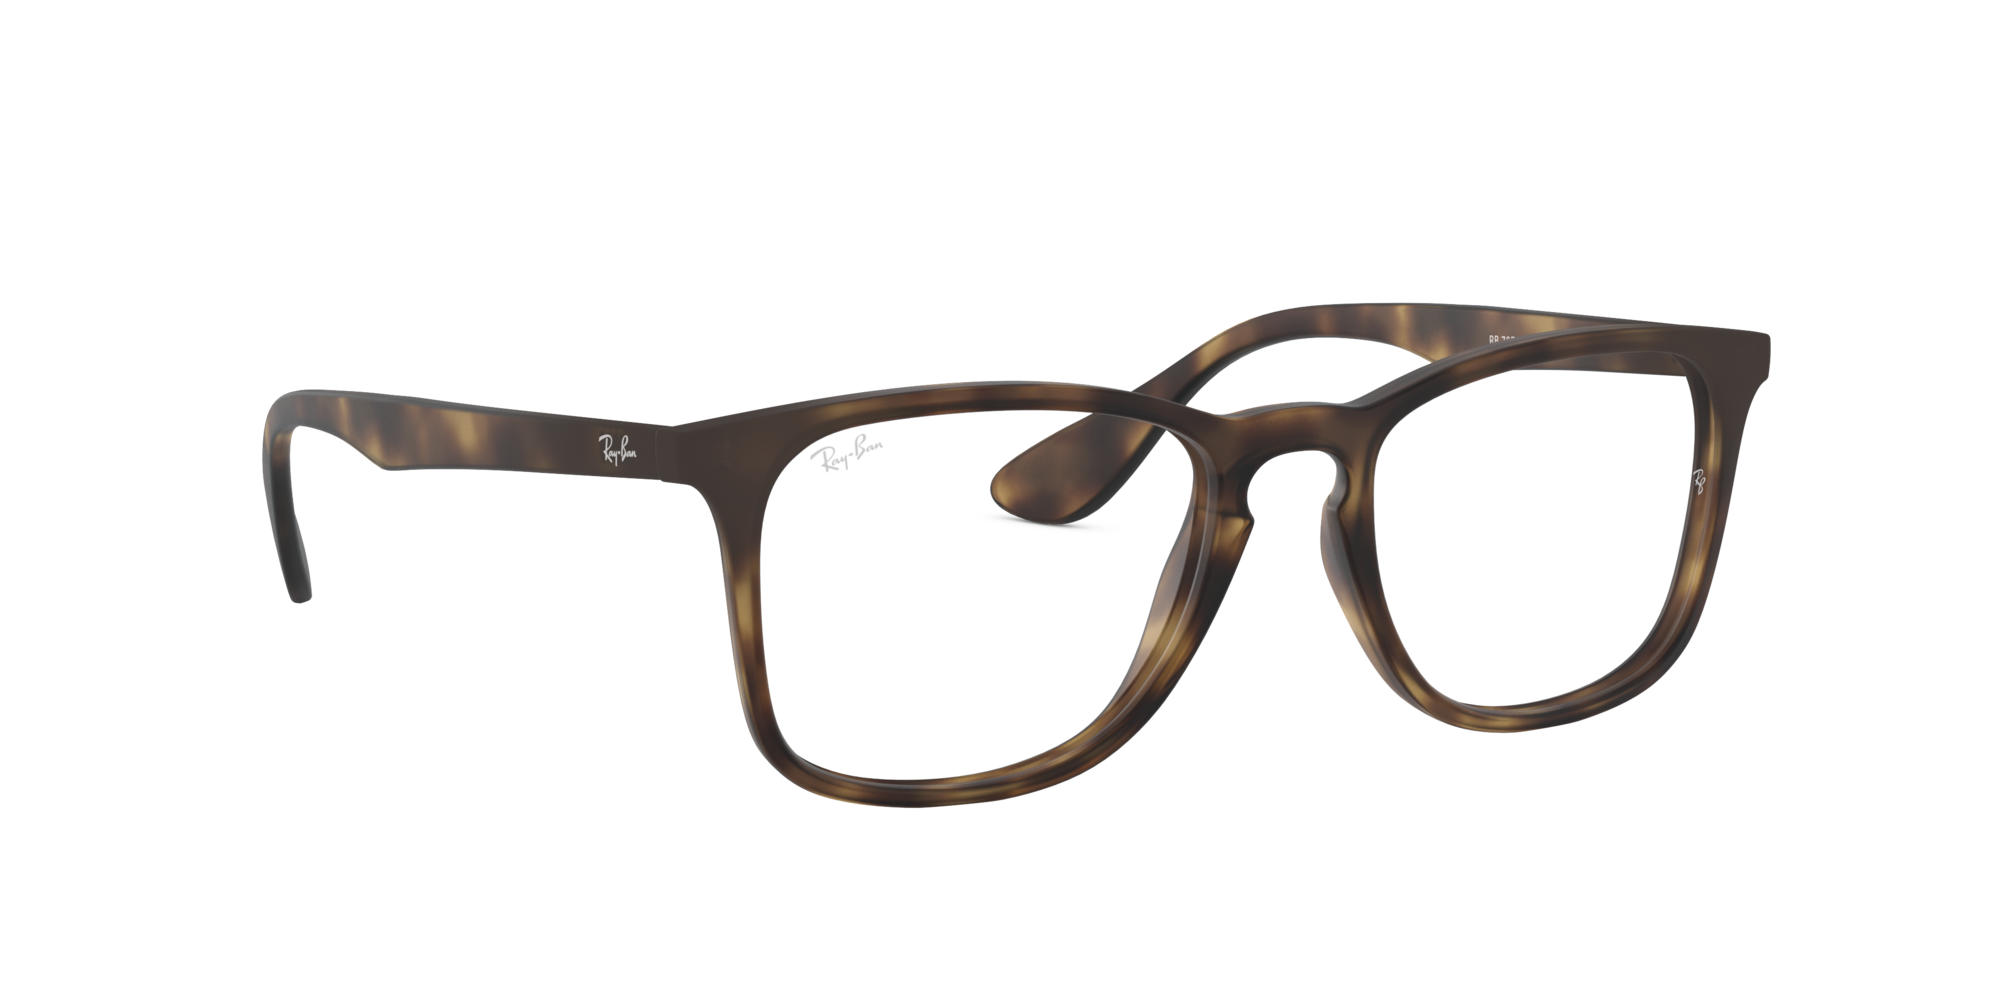 Angle_Right01 Ray-Ban RX 7074 (5365) Glasses Transparent / Tortoise Shell